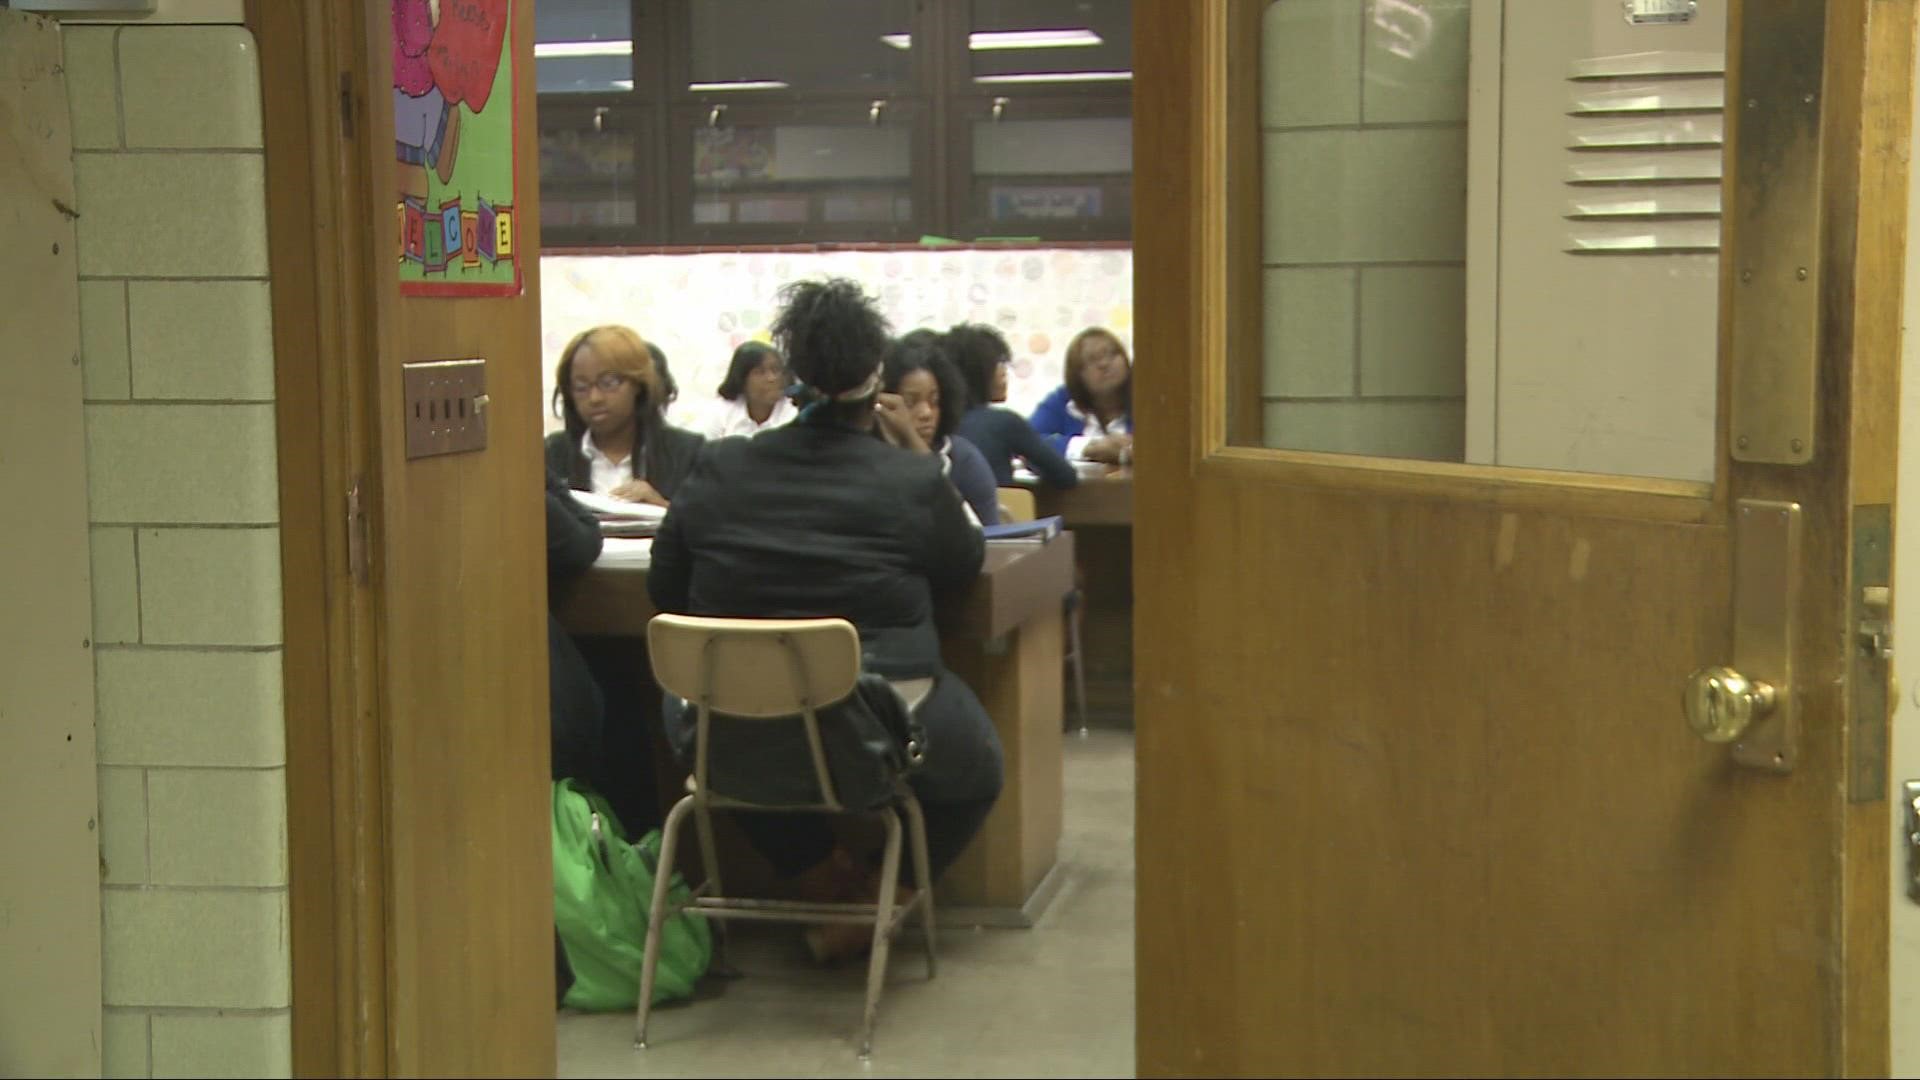 Akron Public Schools say students will continue learning remotely if the teachers go on strike.